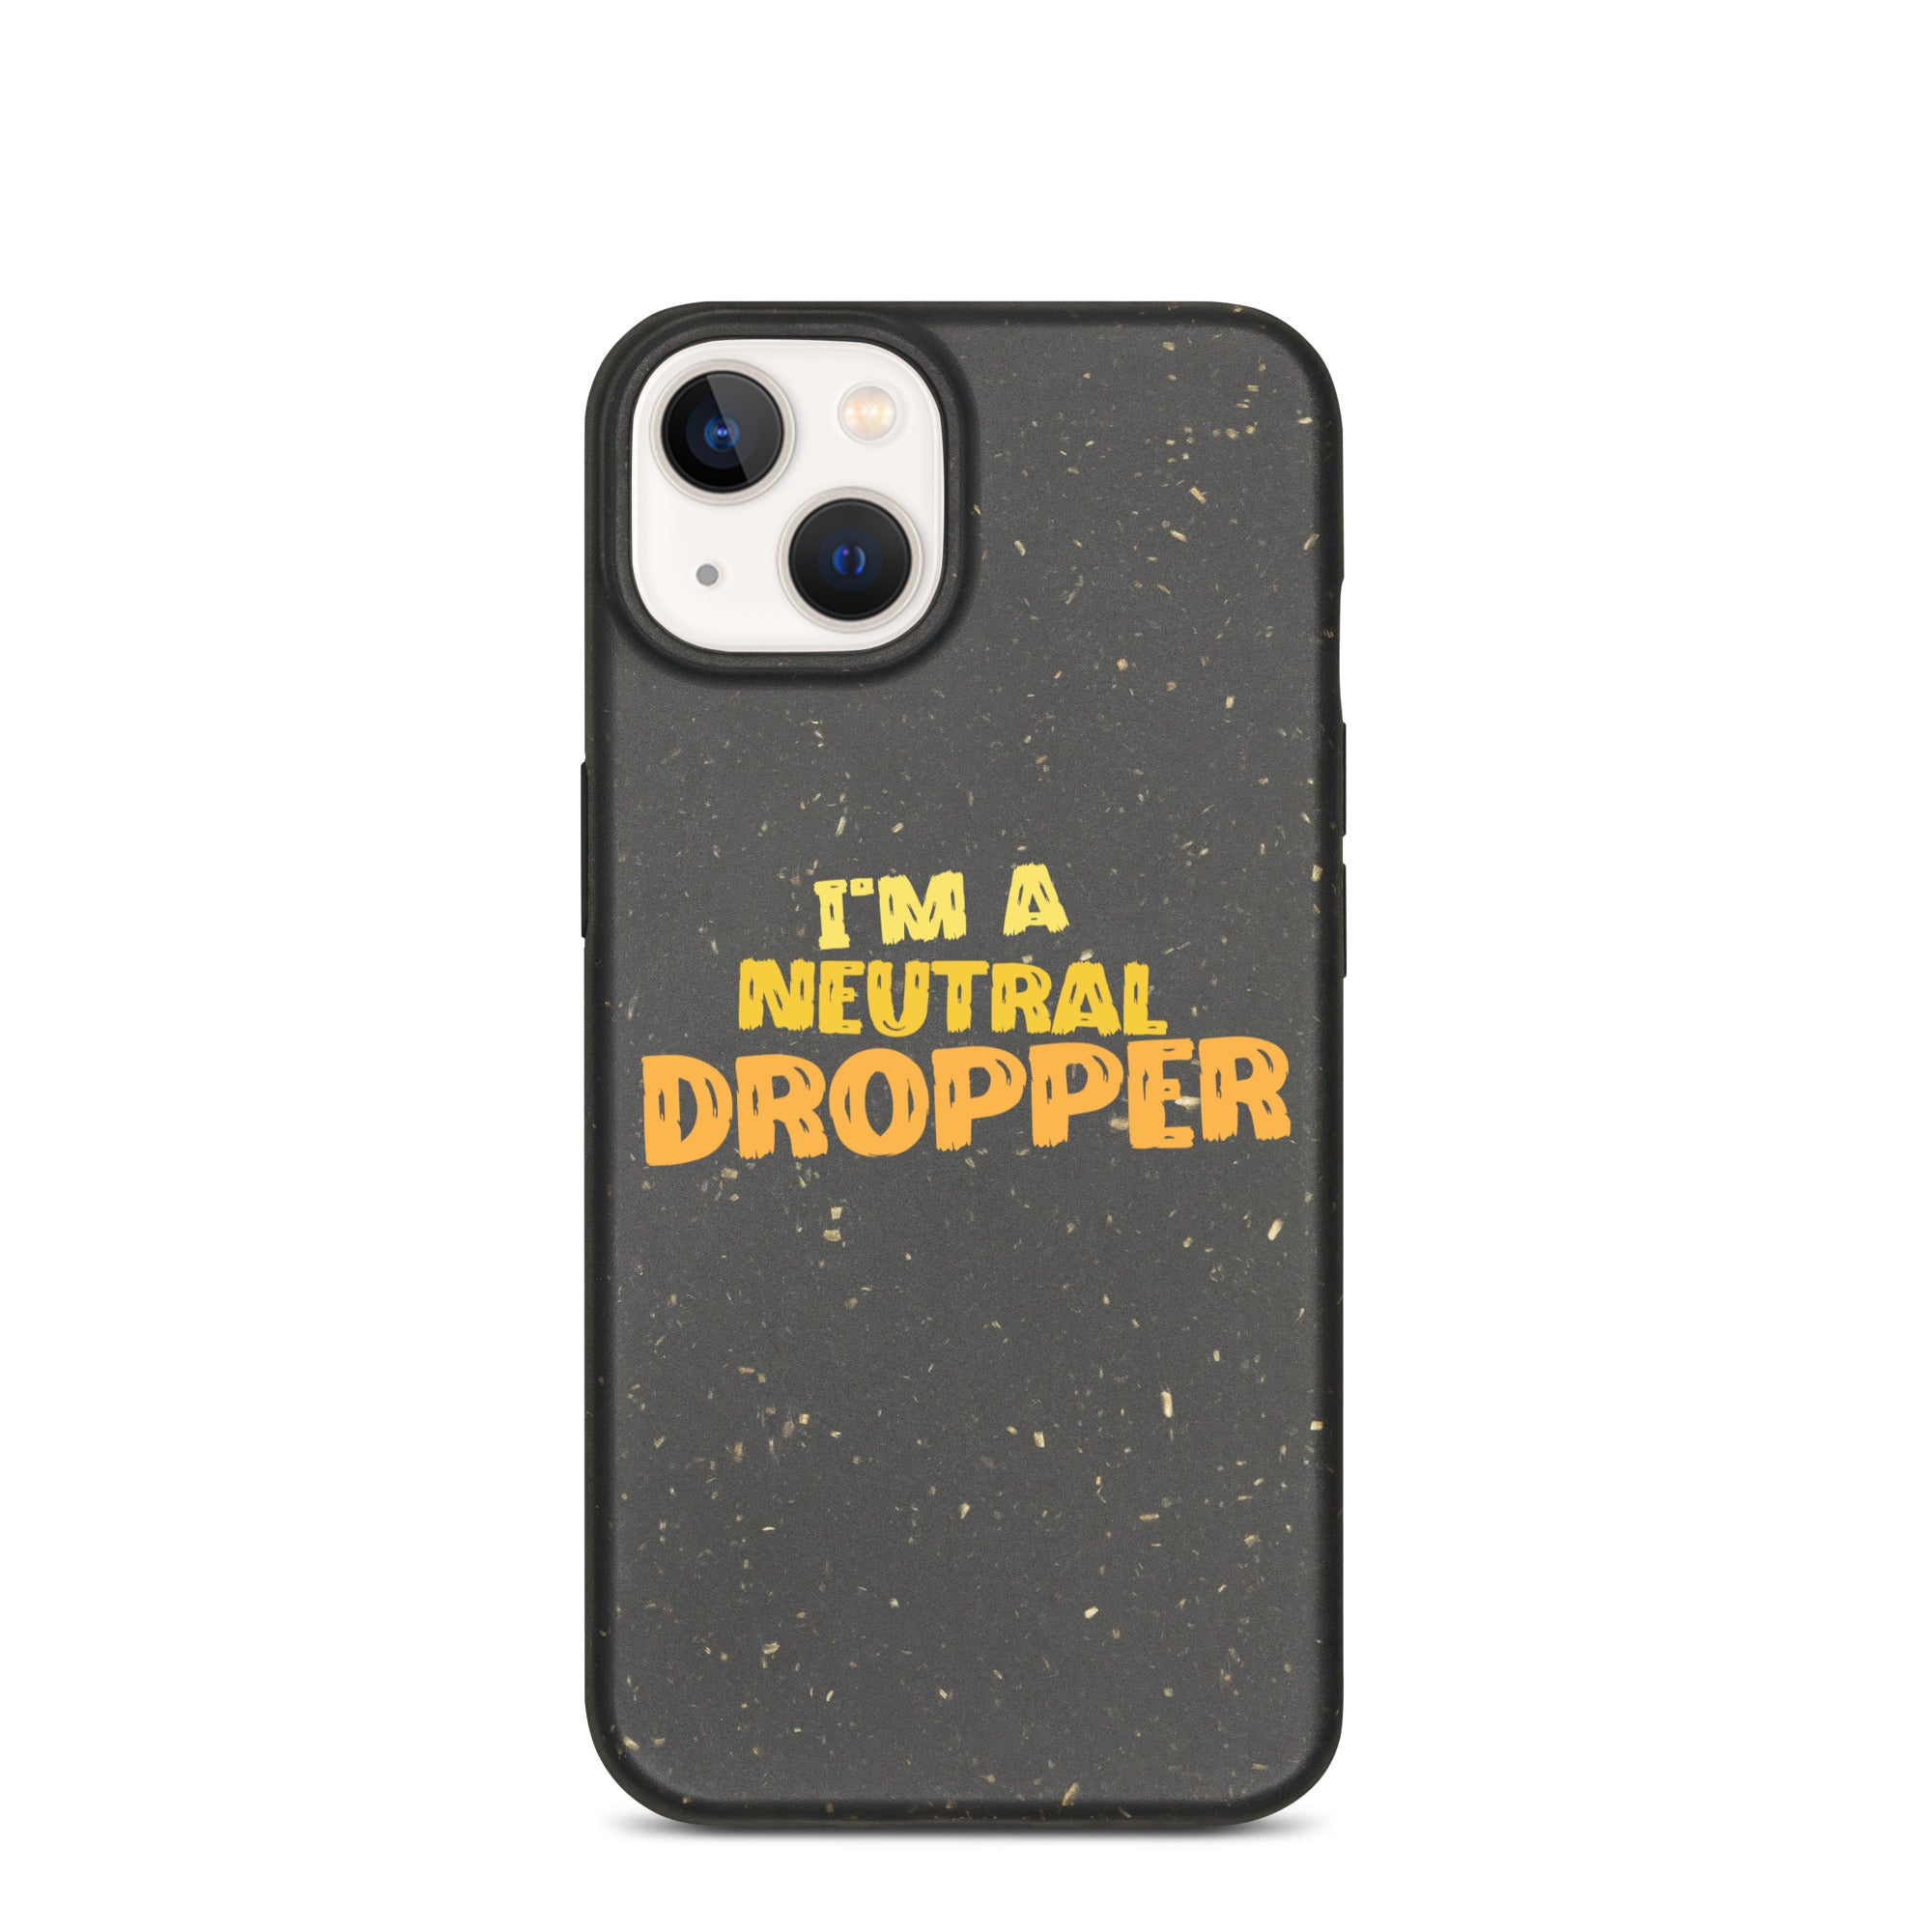 I'm a Neutral Dropper Speckled iPhone case